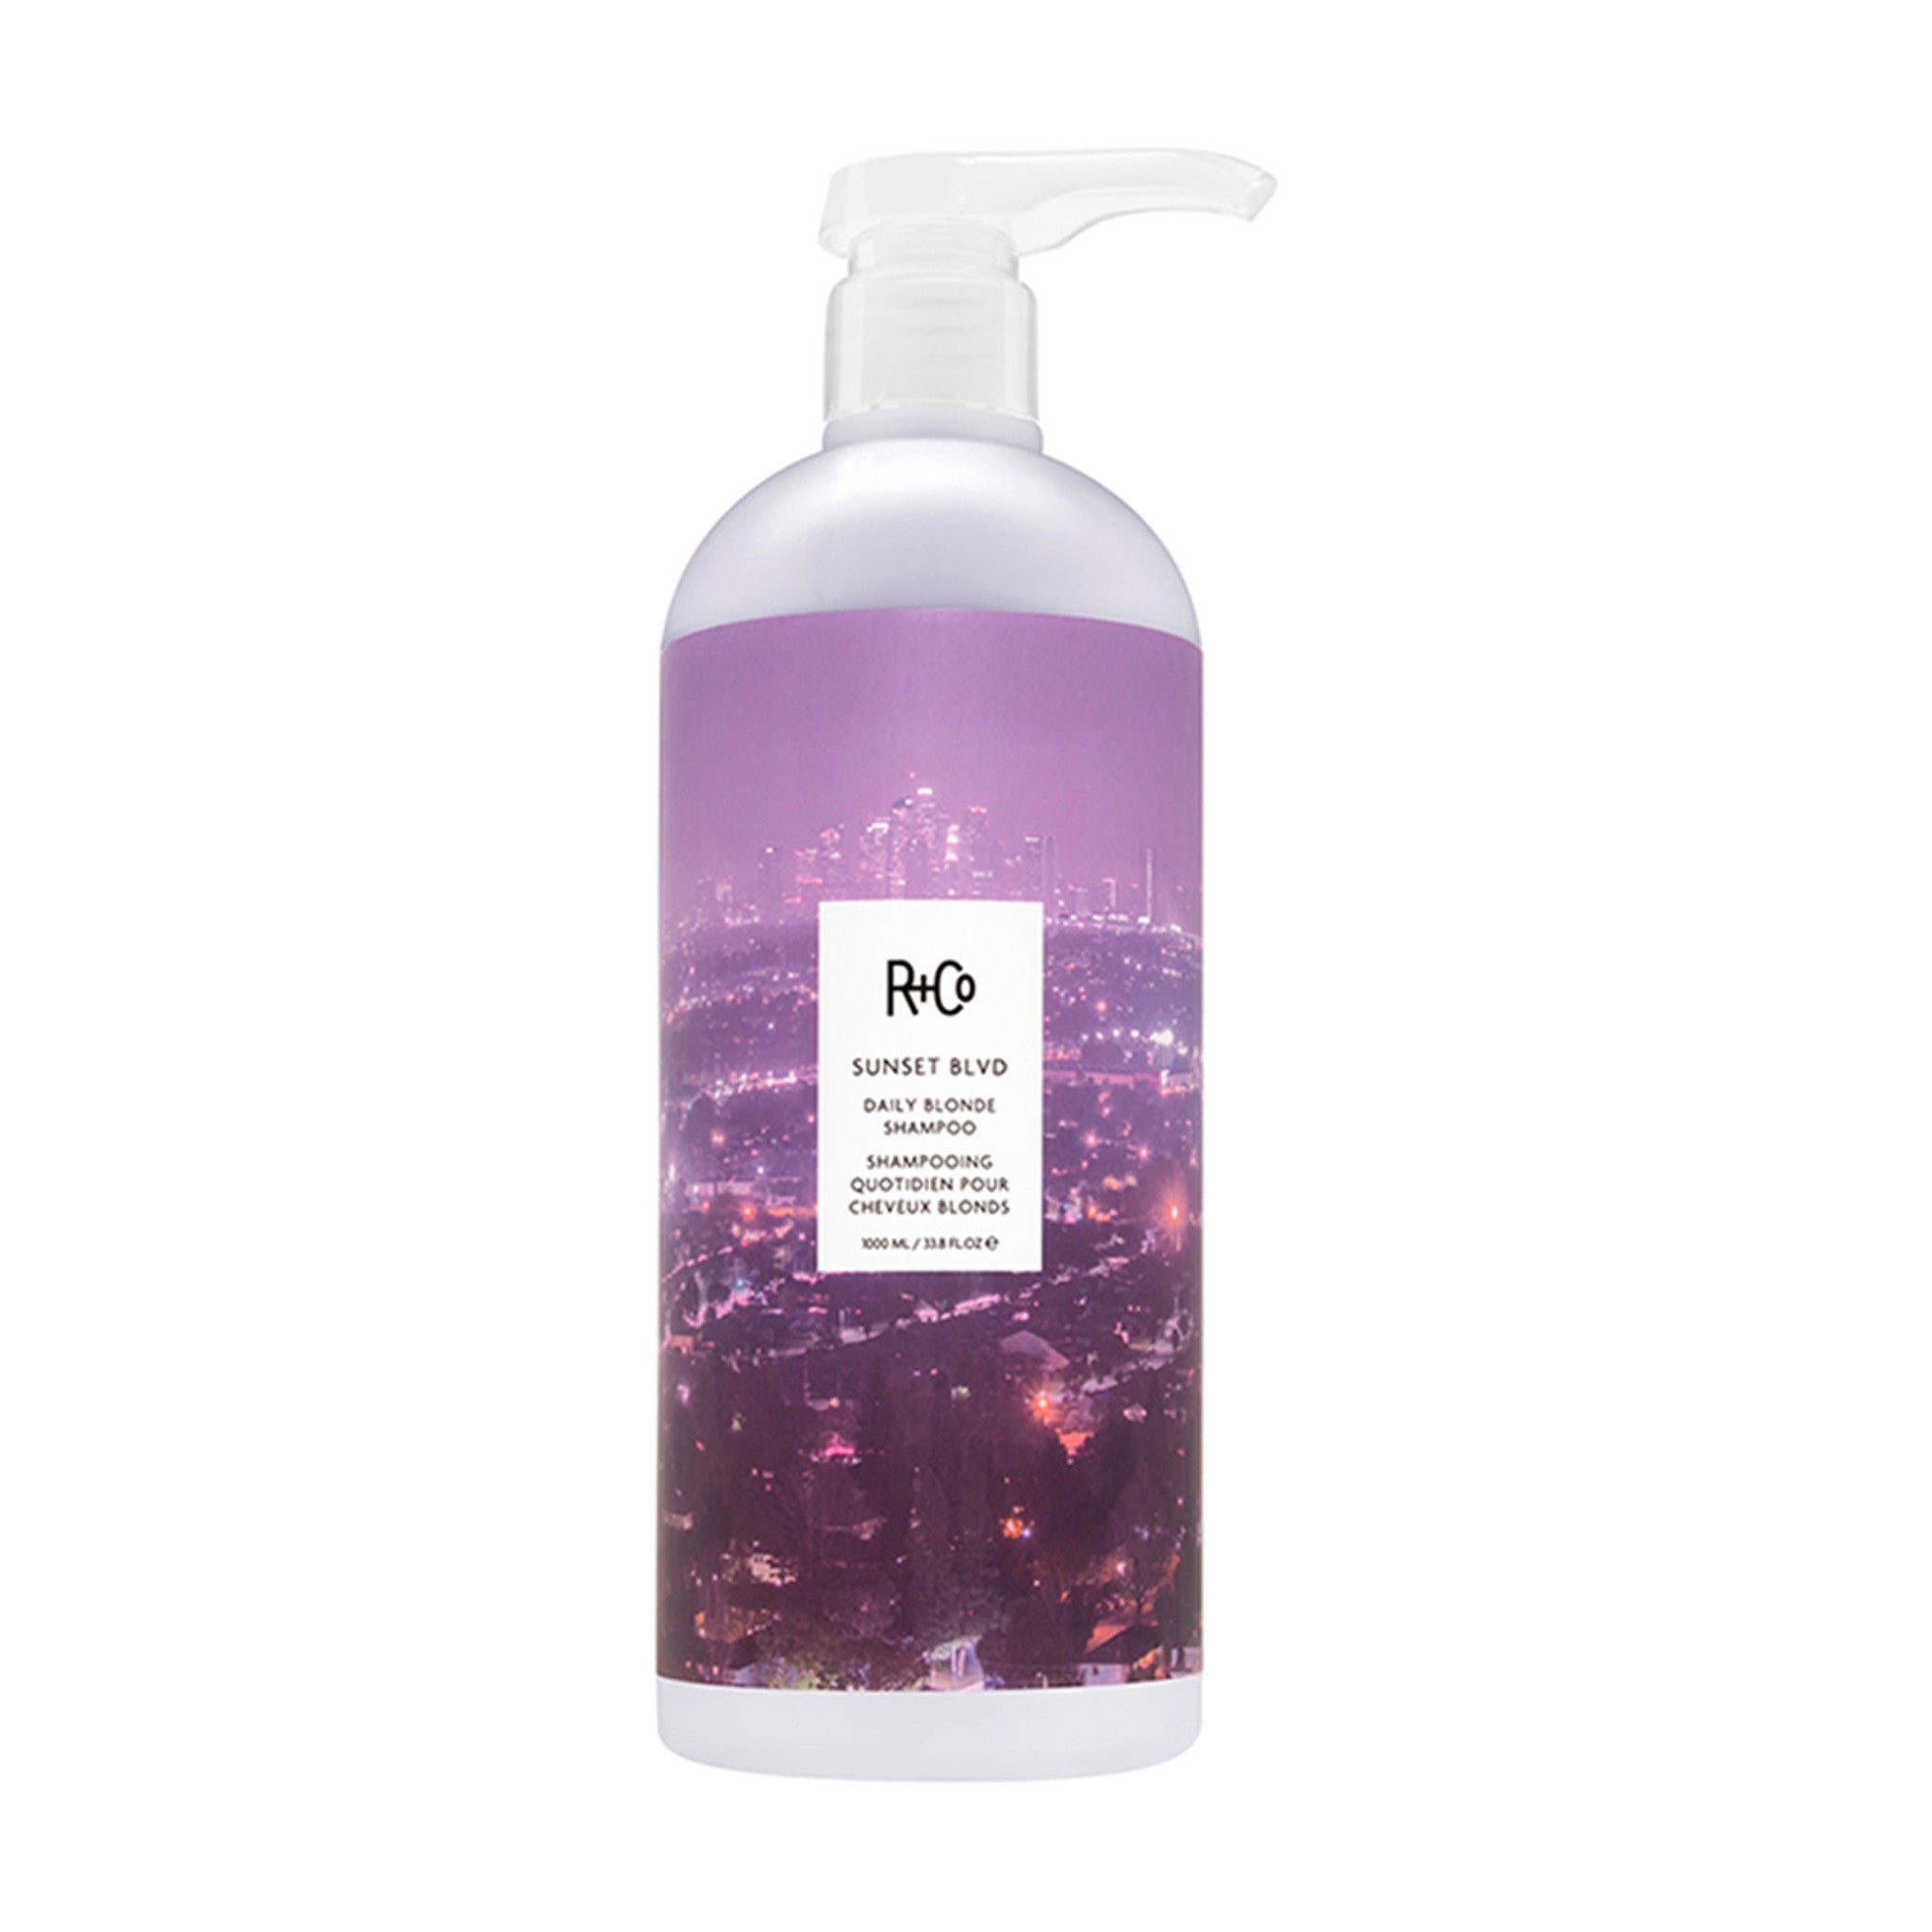 R+Co Sunset BLVD Daily Blonde Shampoo Size variant: 33.8 oz | 1L main image. This product is for gray hair